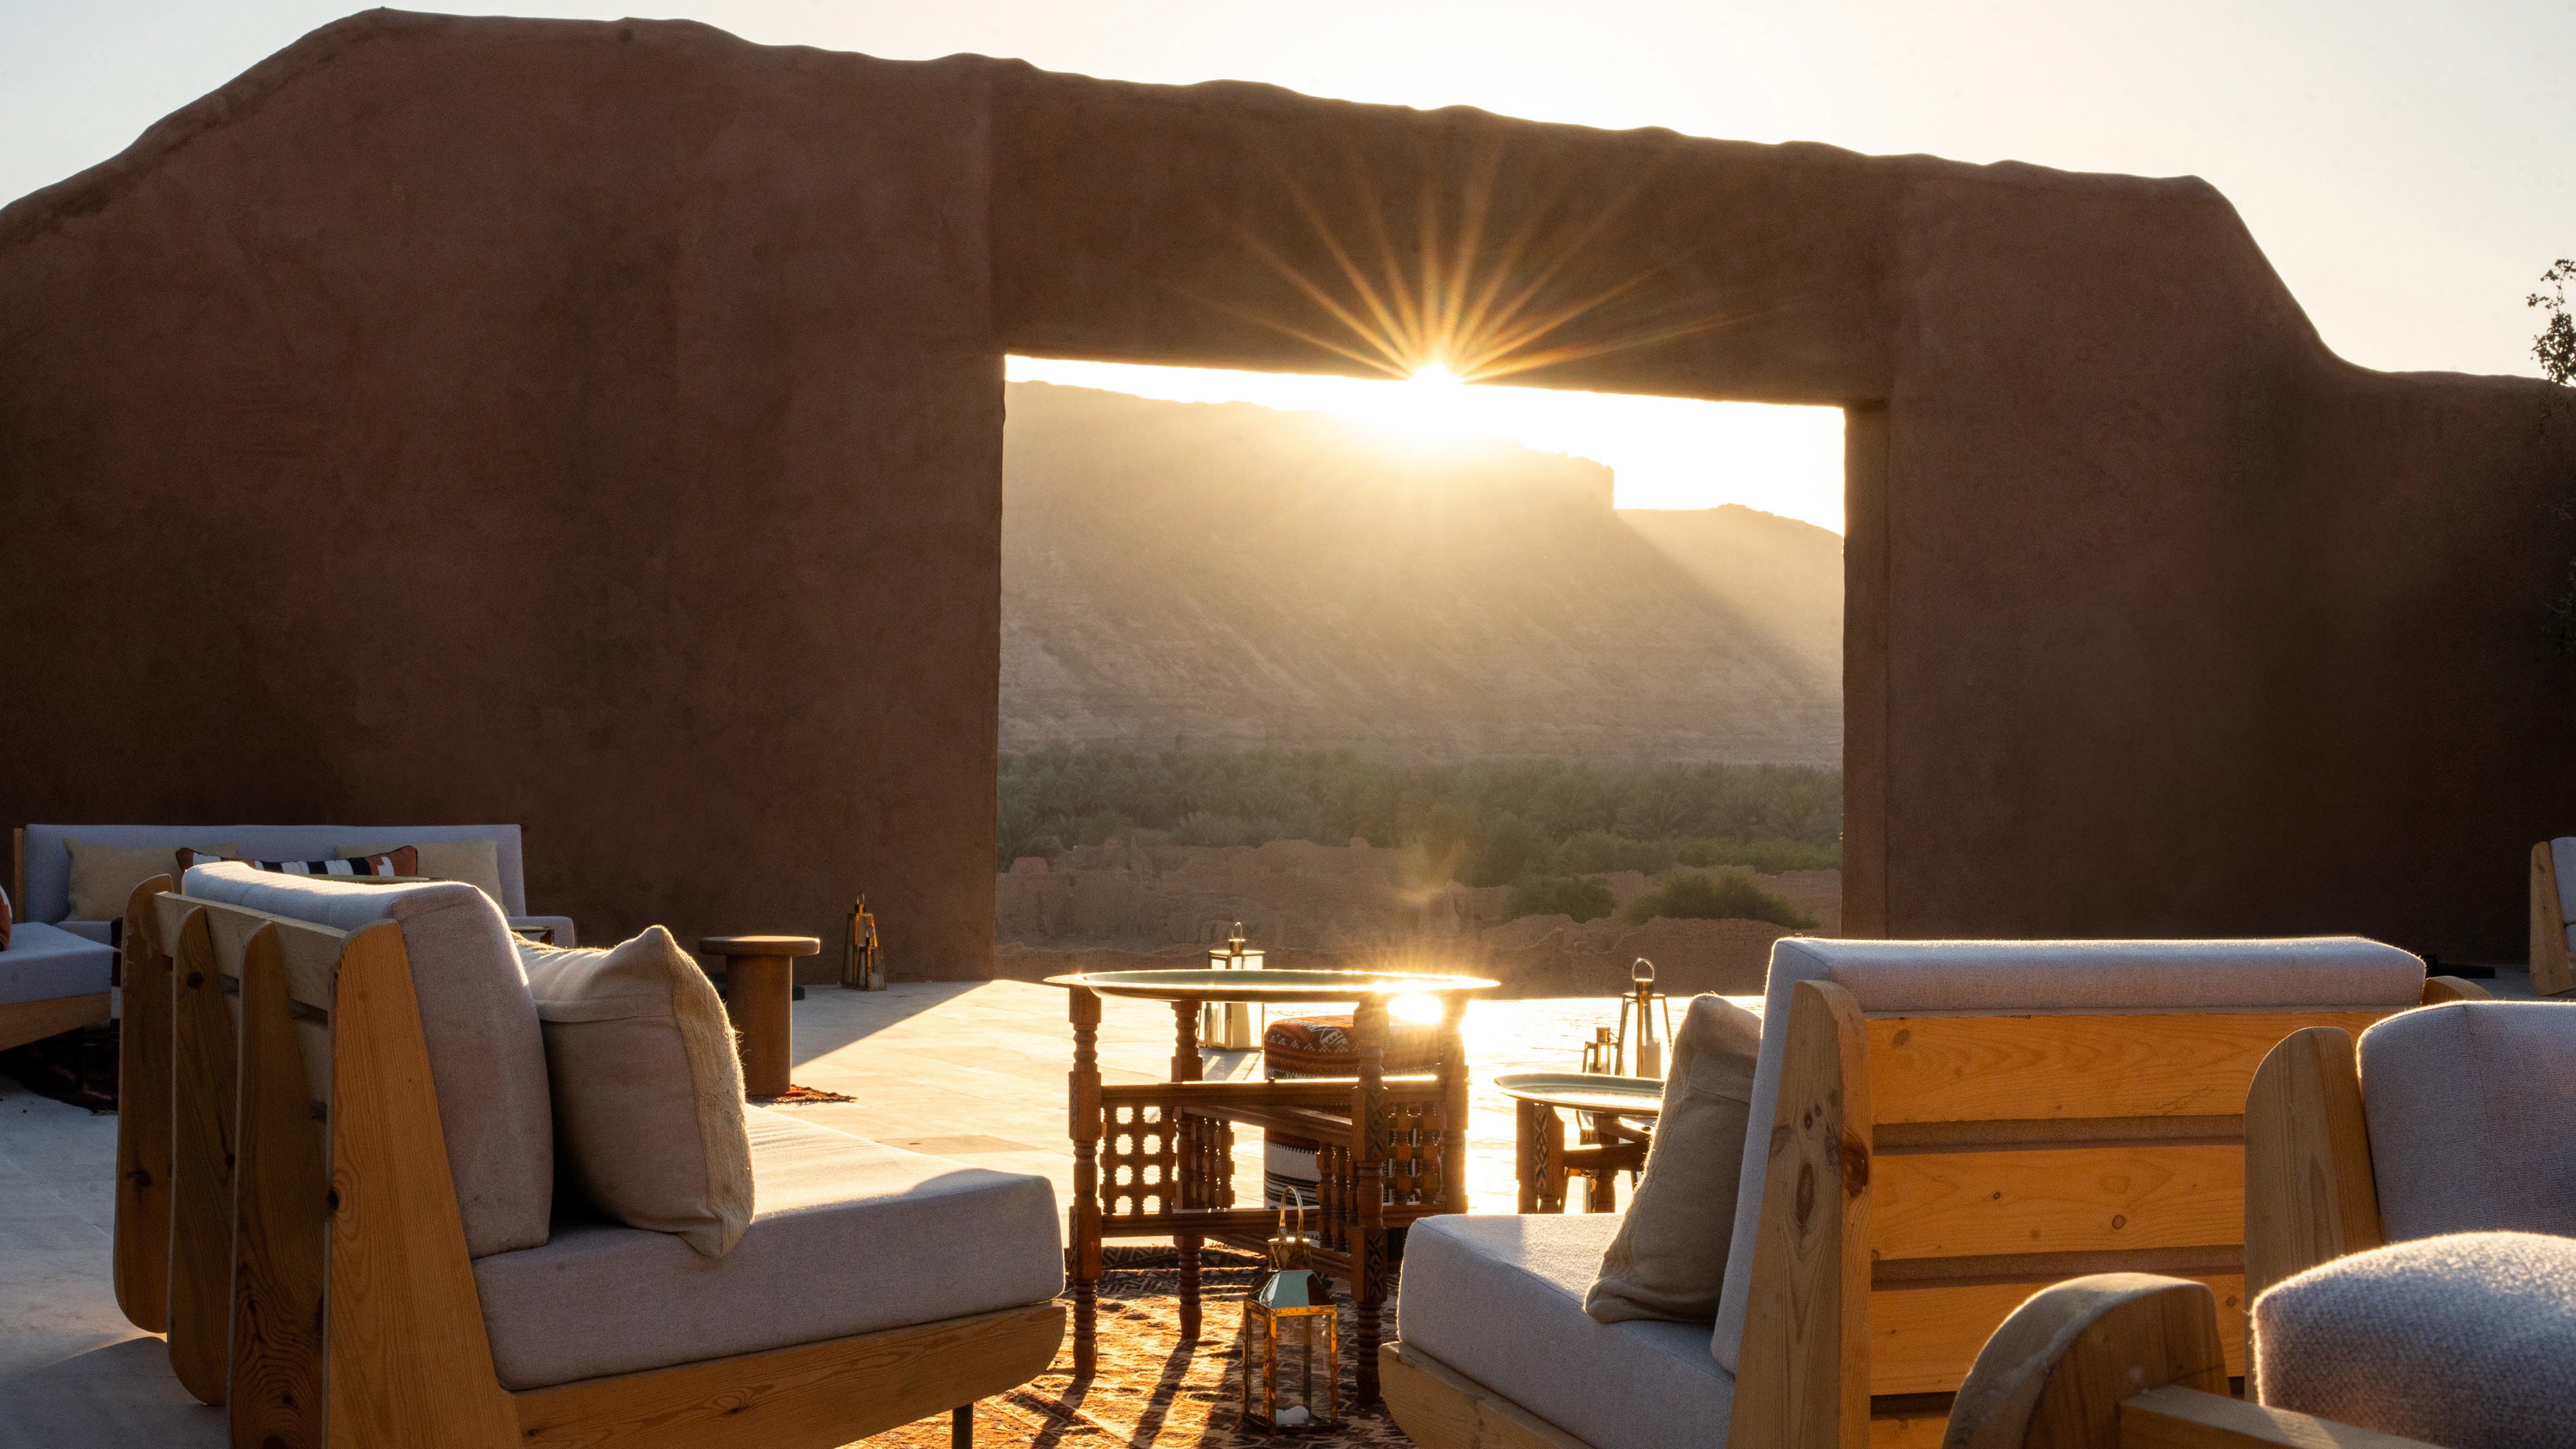 The desert town being transformed into beautiful hotels